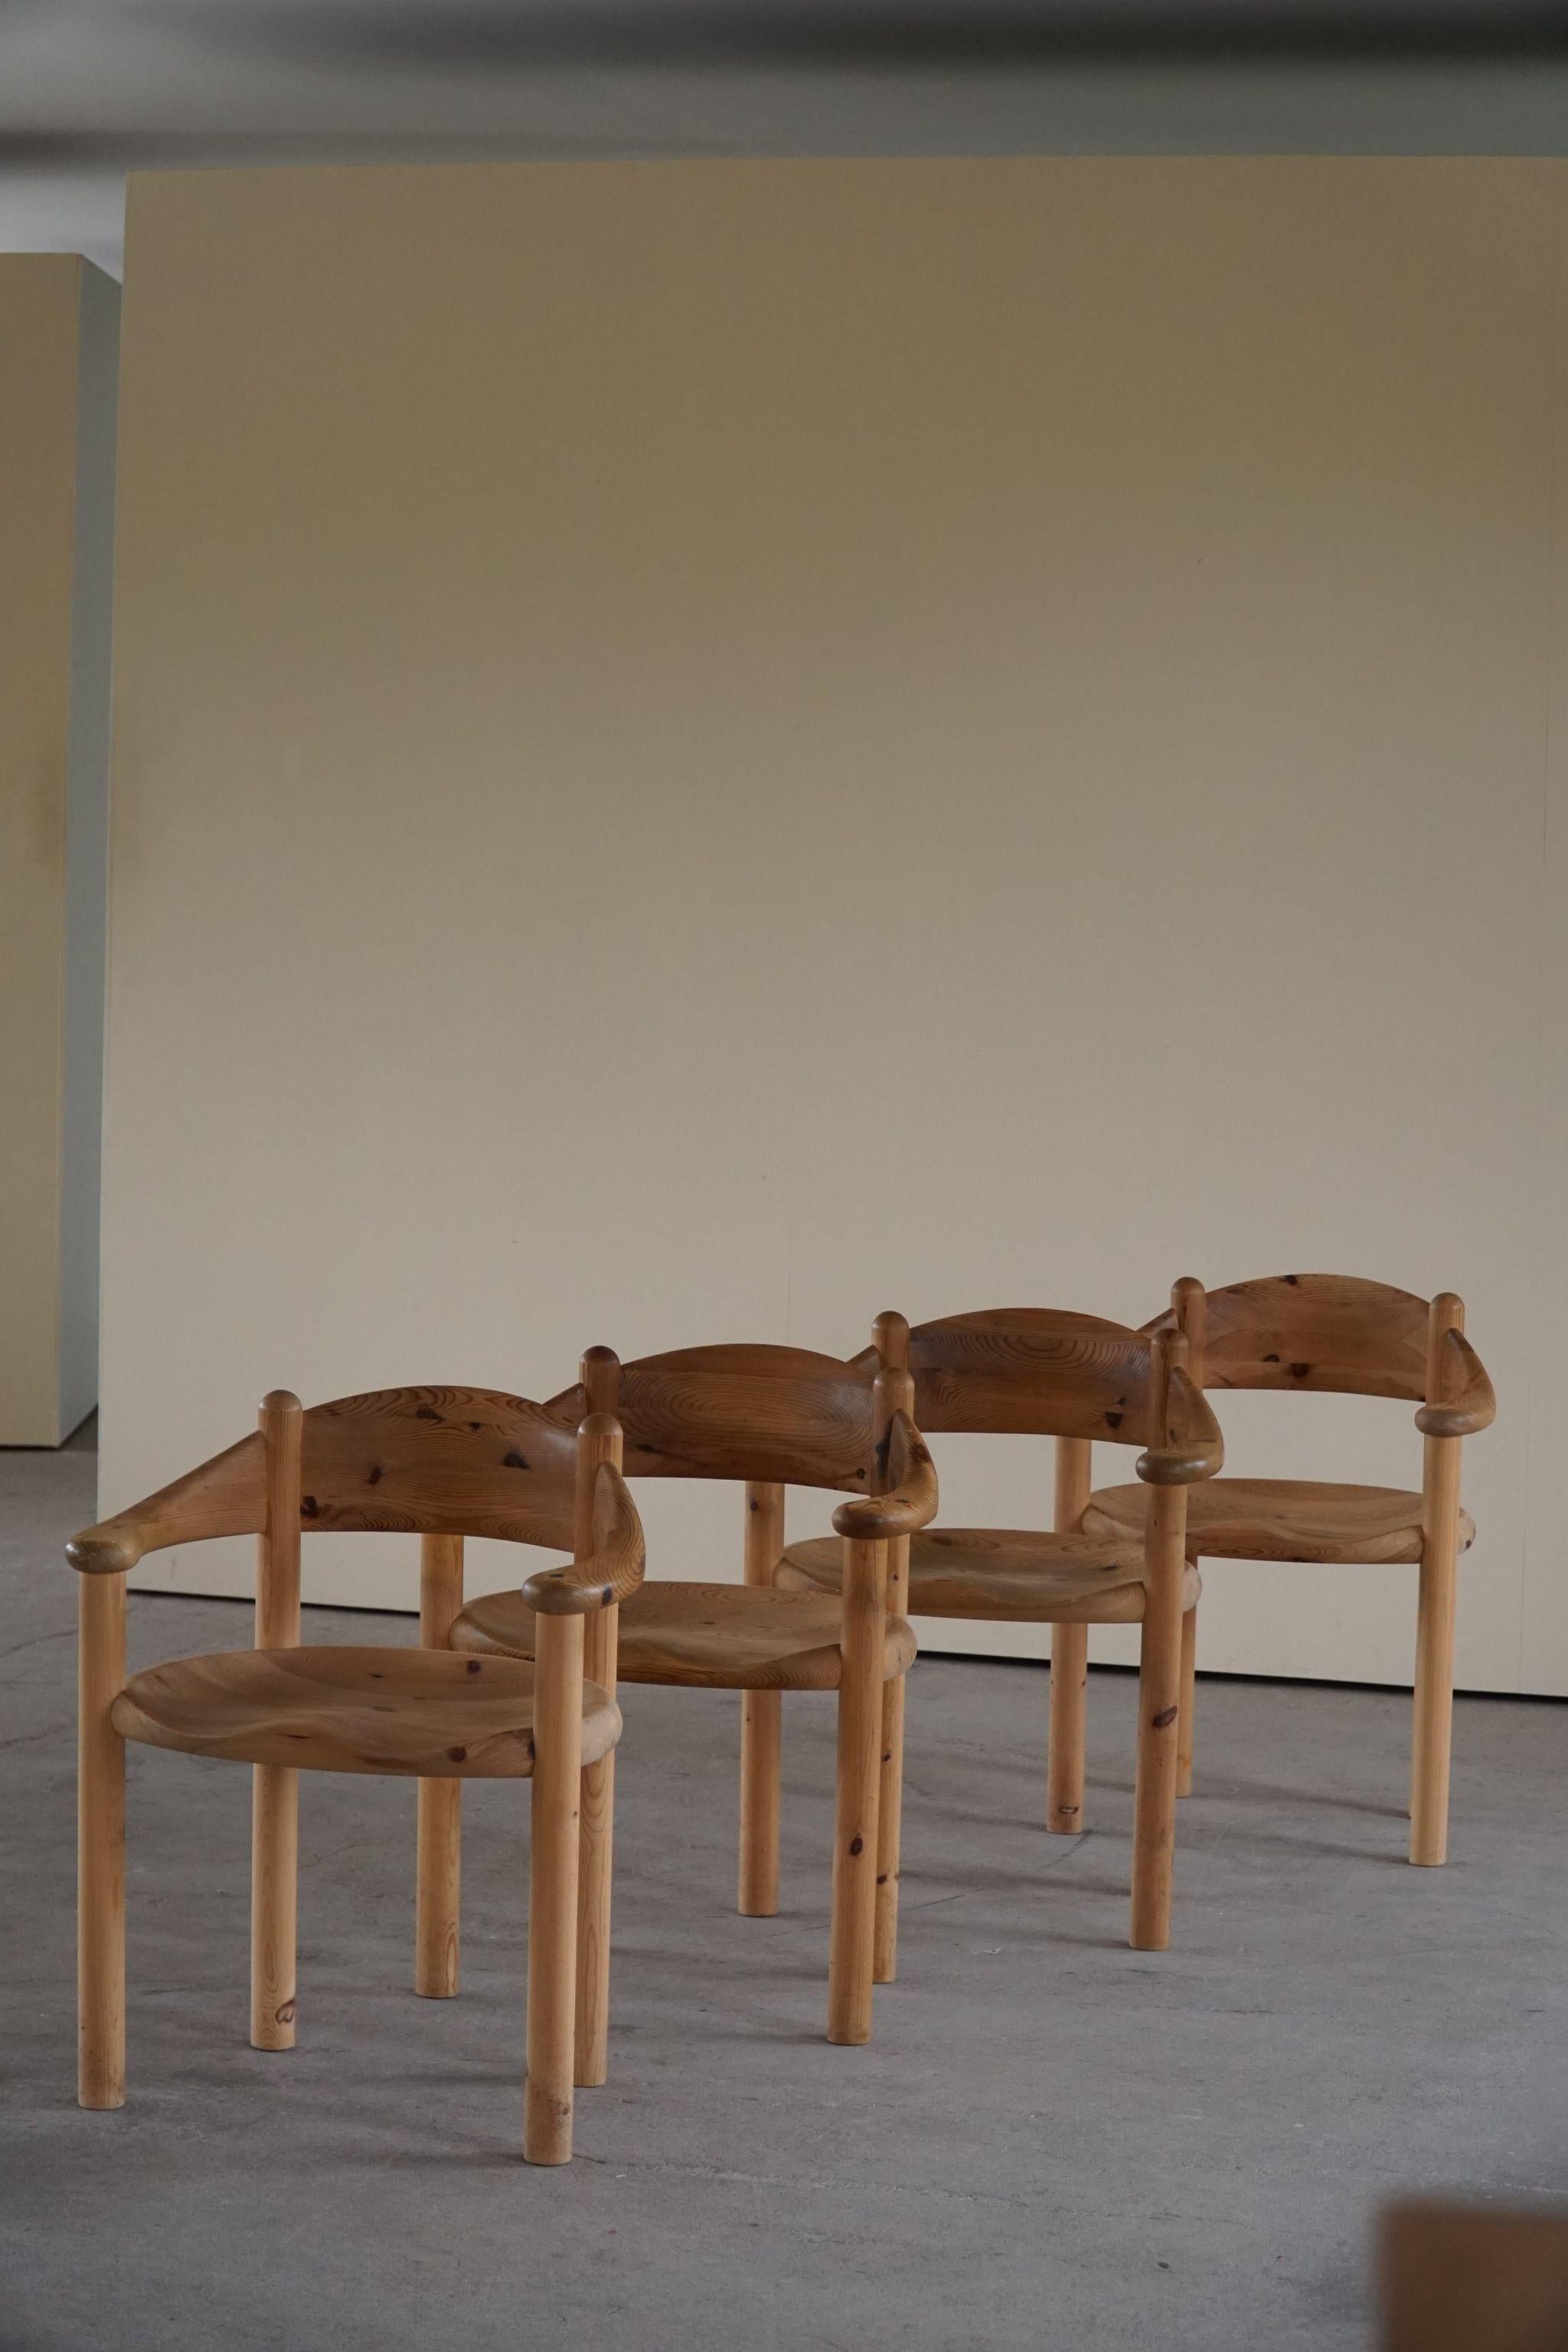 Brutalist Rainer Daumiller, Set of 4 Dining Chairs in Solid Pine, Danish Modern, 1970s